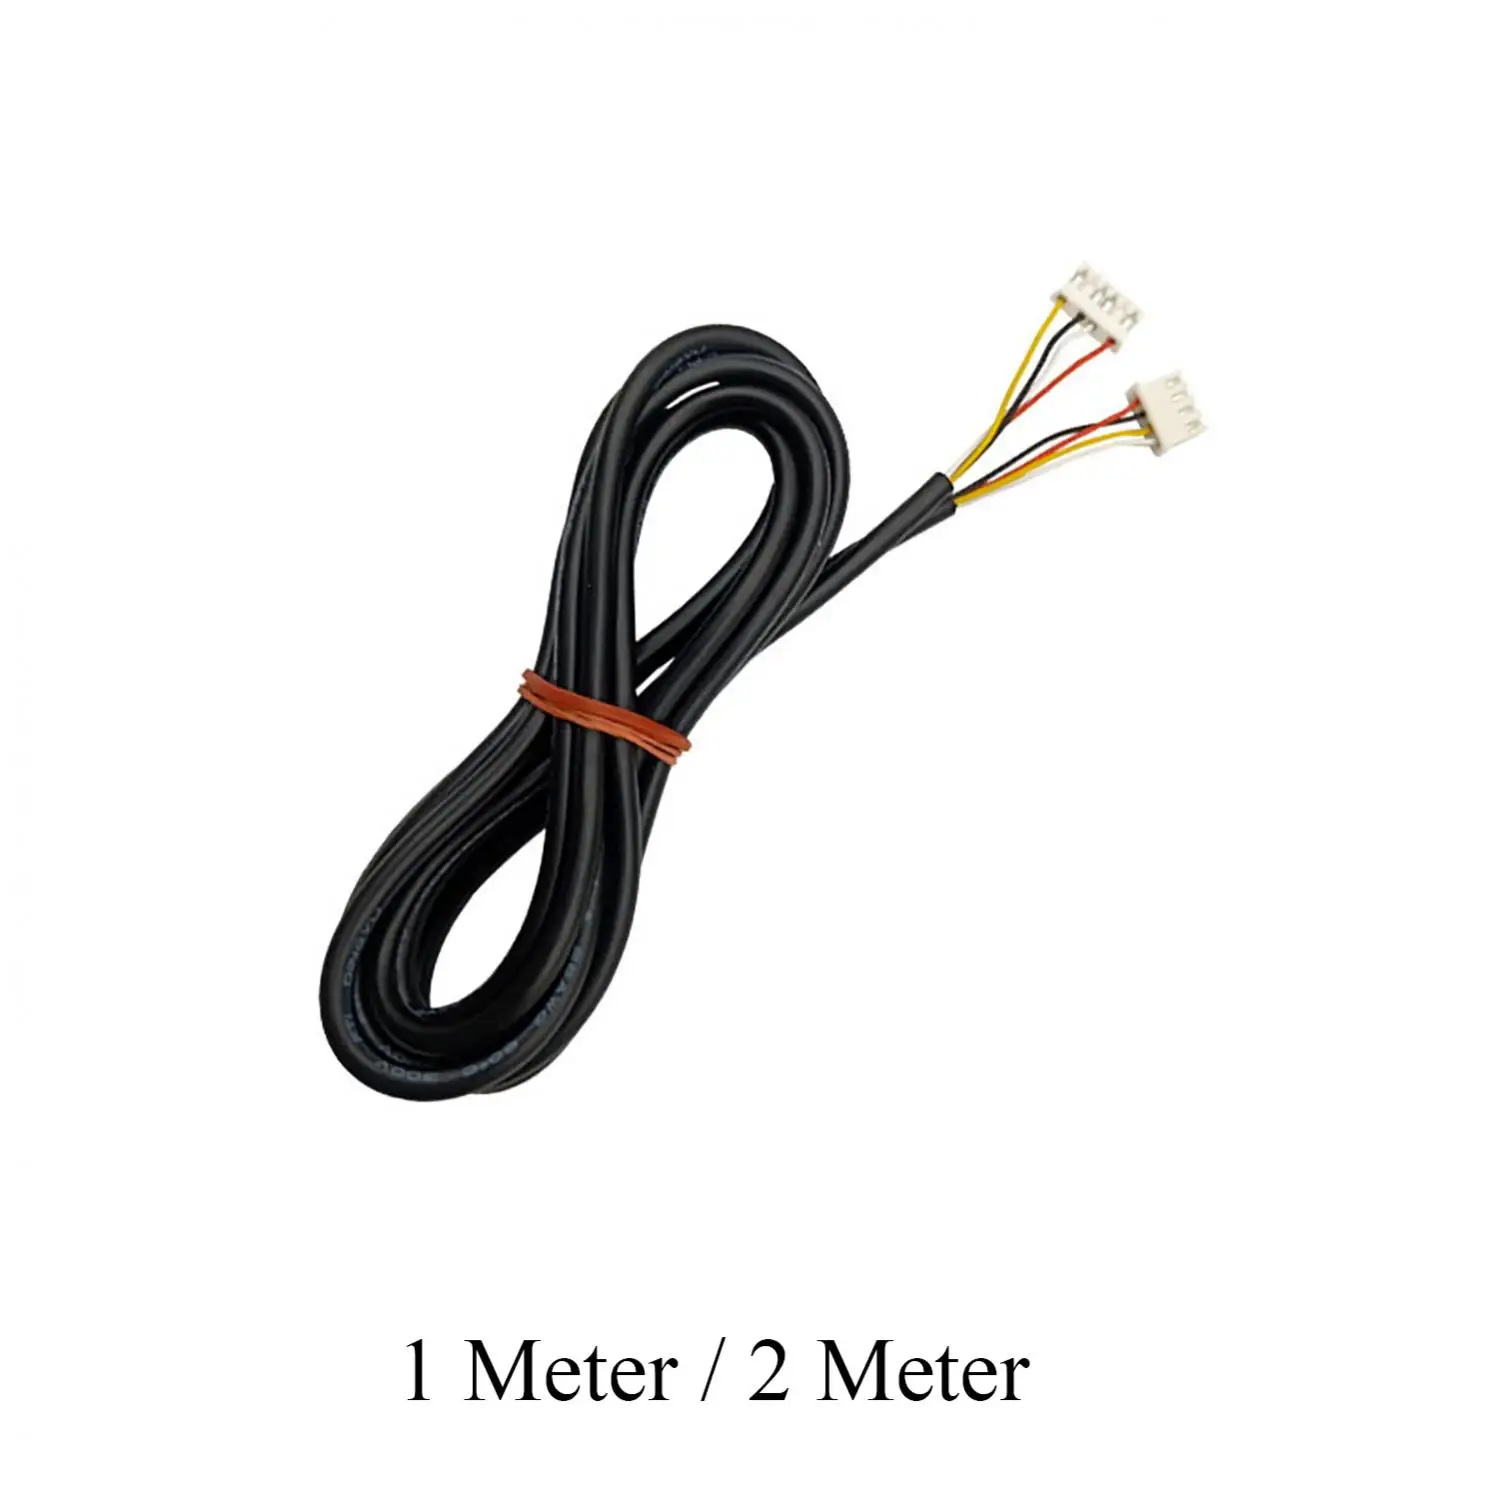 

1m / 2m XH2.54 4pin to XH2.0 6pin Stepper Motor Sheath Cables for 3D Printer, 2-Phase Motor and Control Board Connection Wire